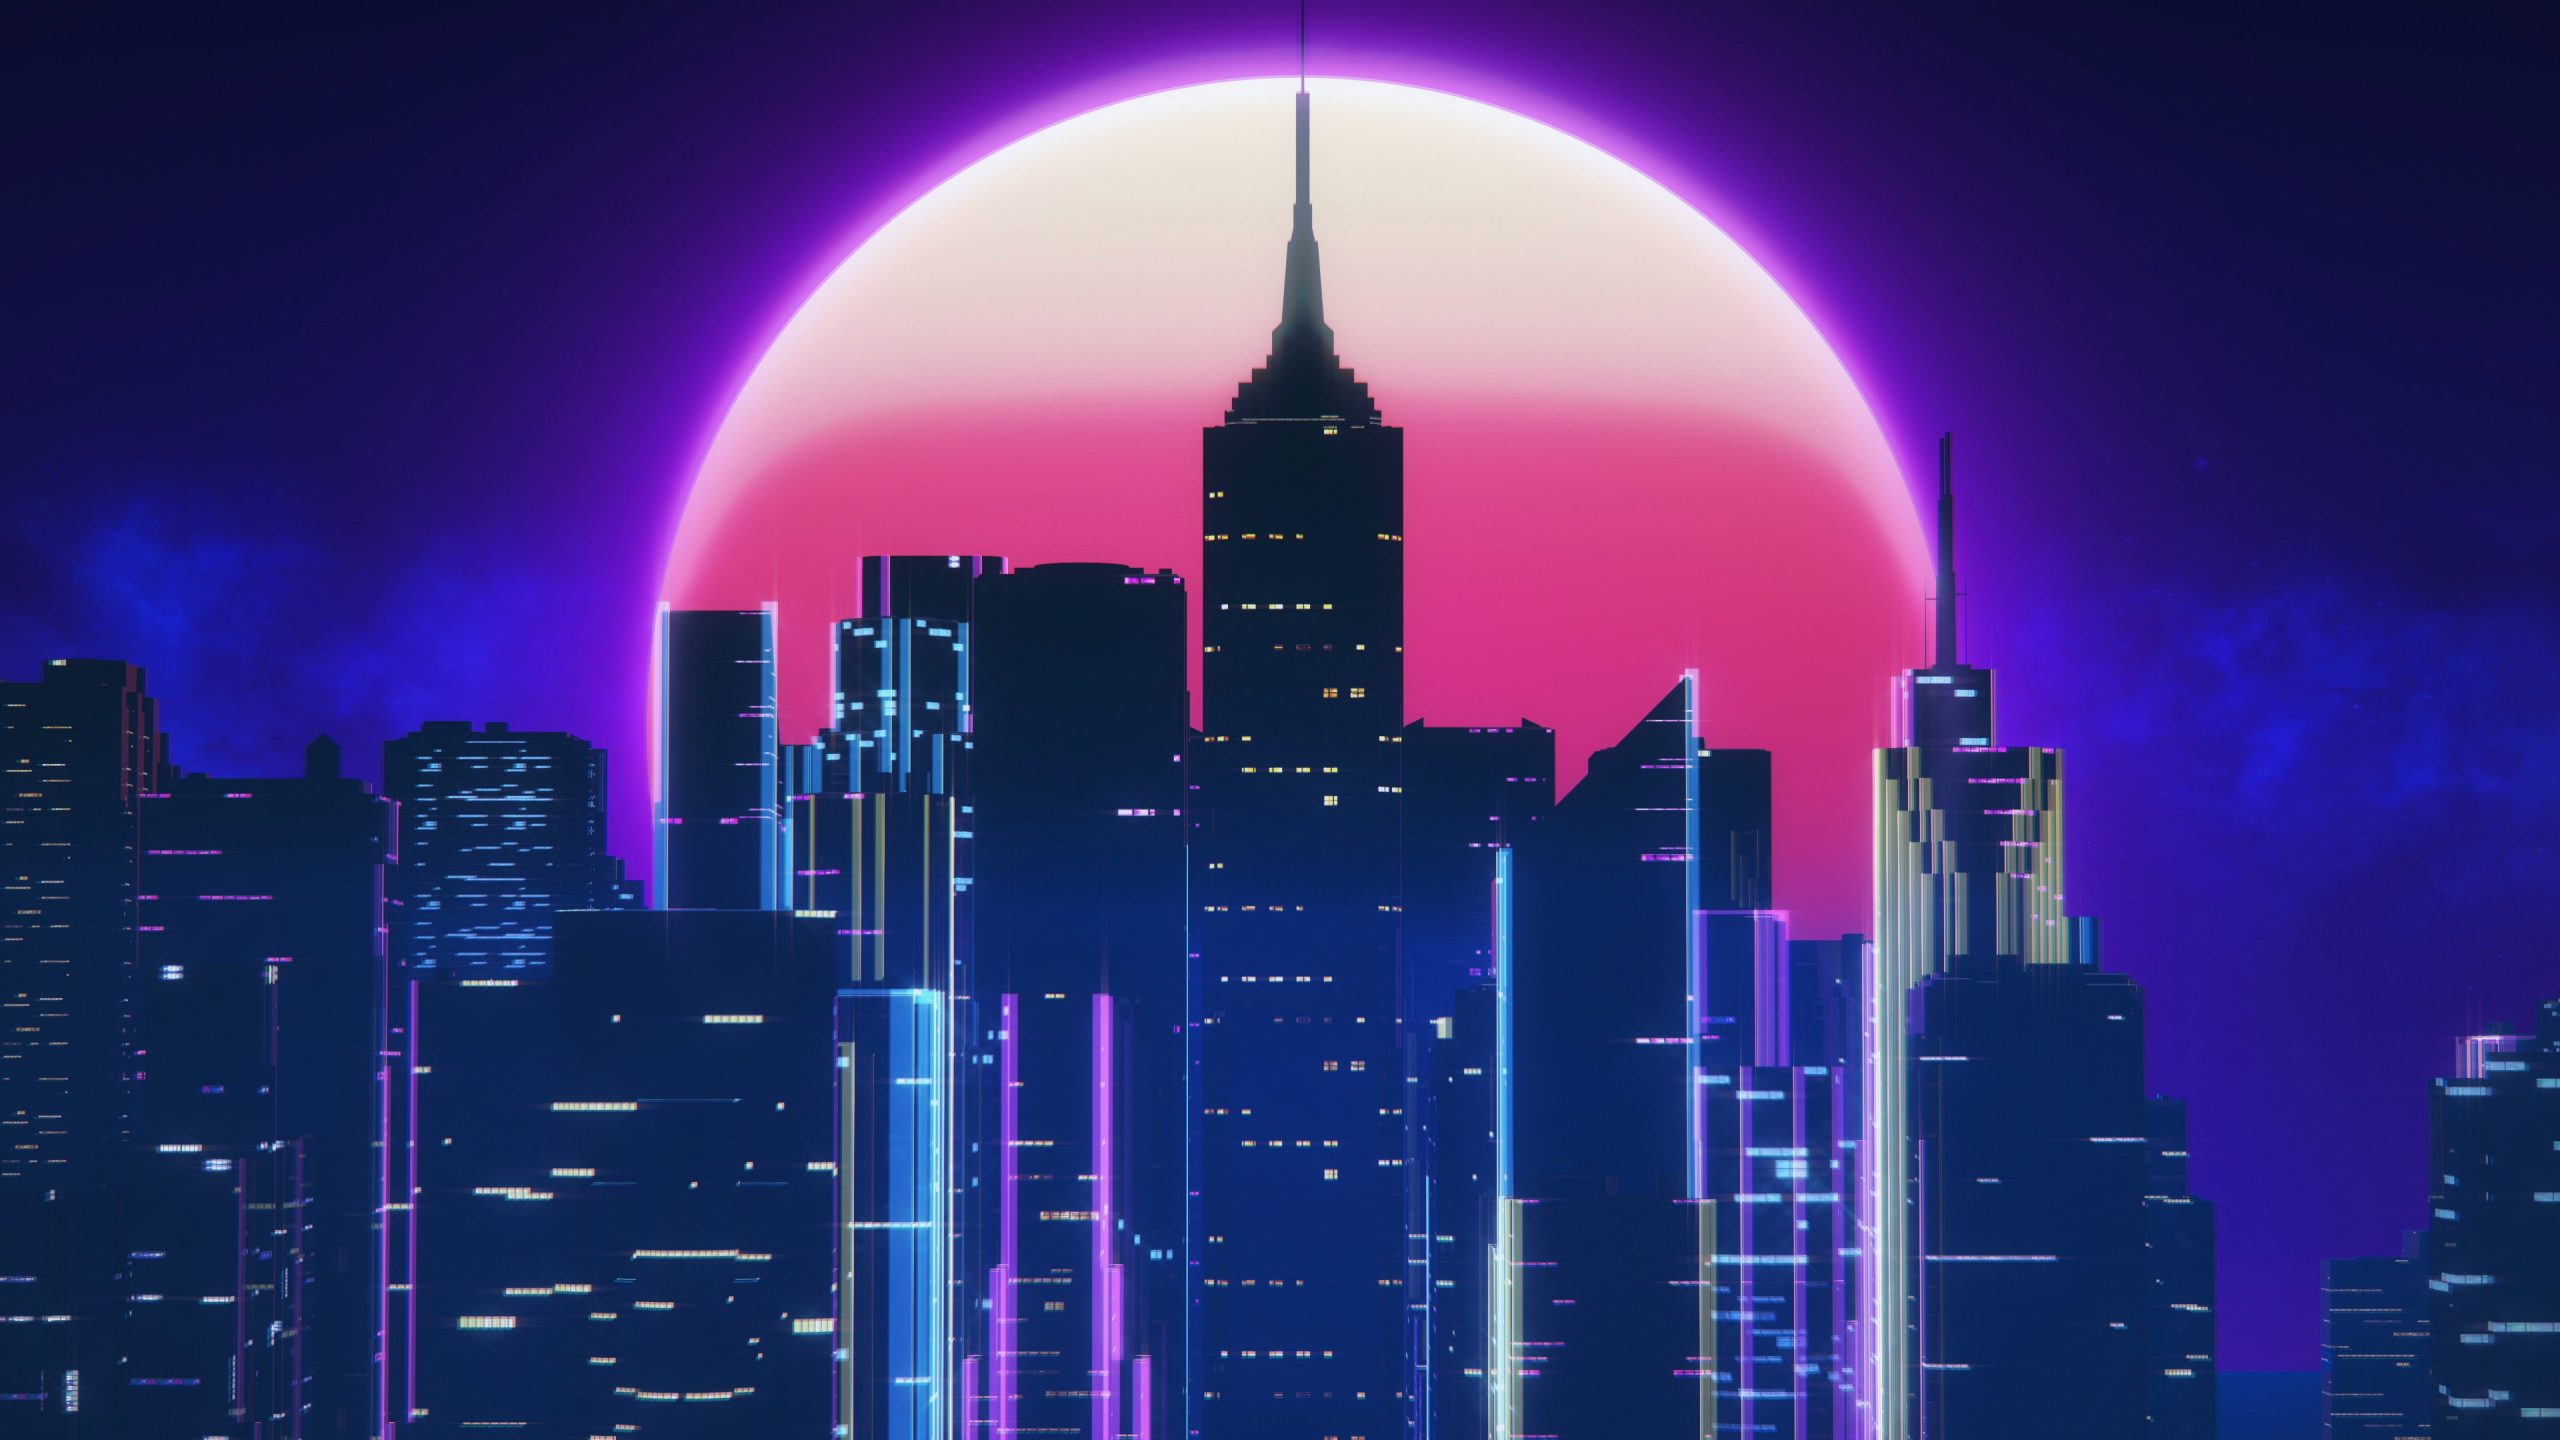 Night wallpaper, Music, The city, The moon, Style, Neon, 80’s, Synth